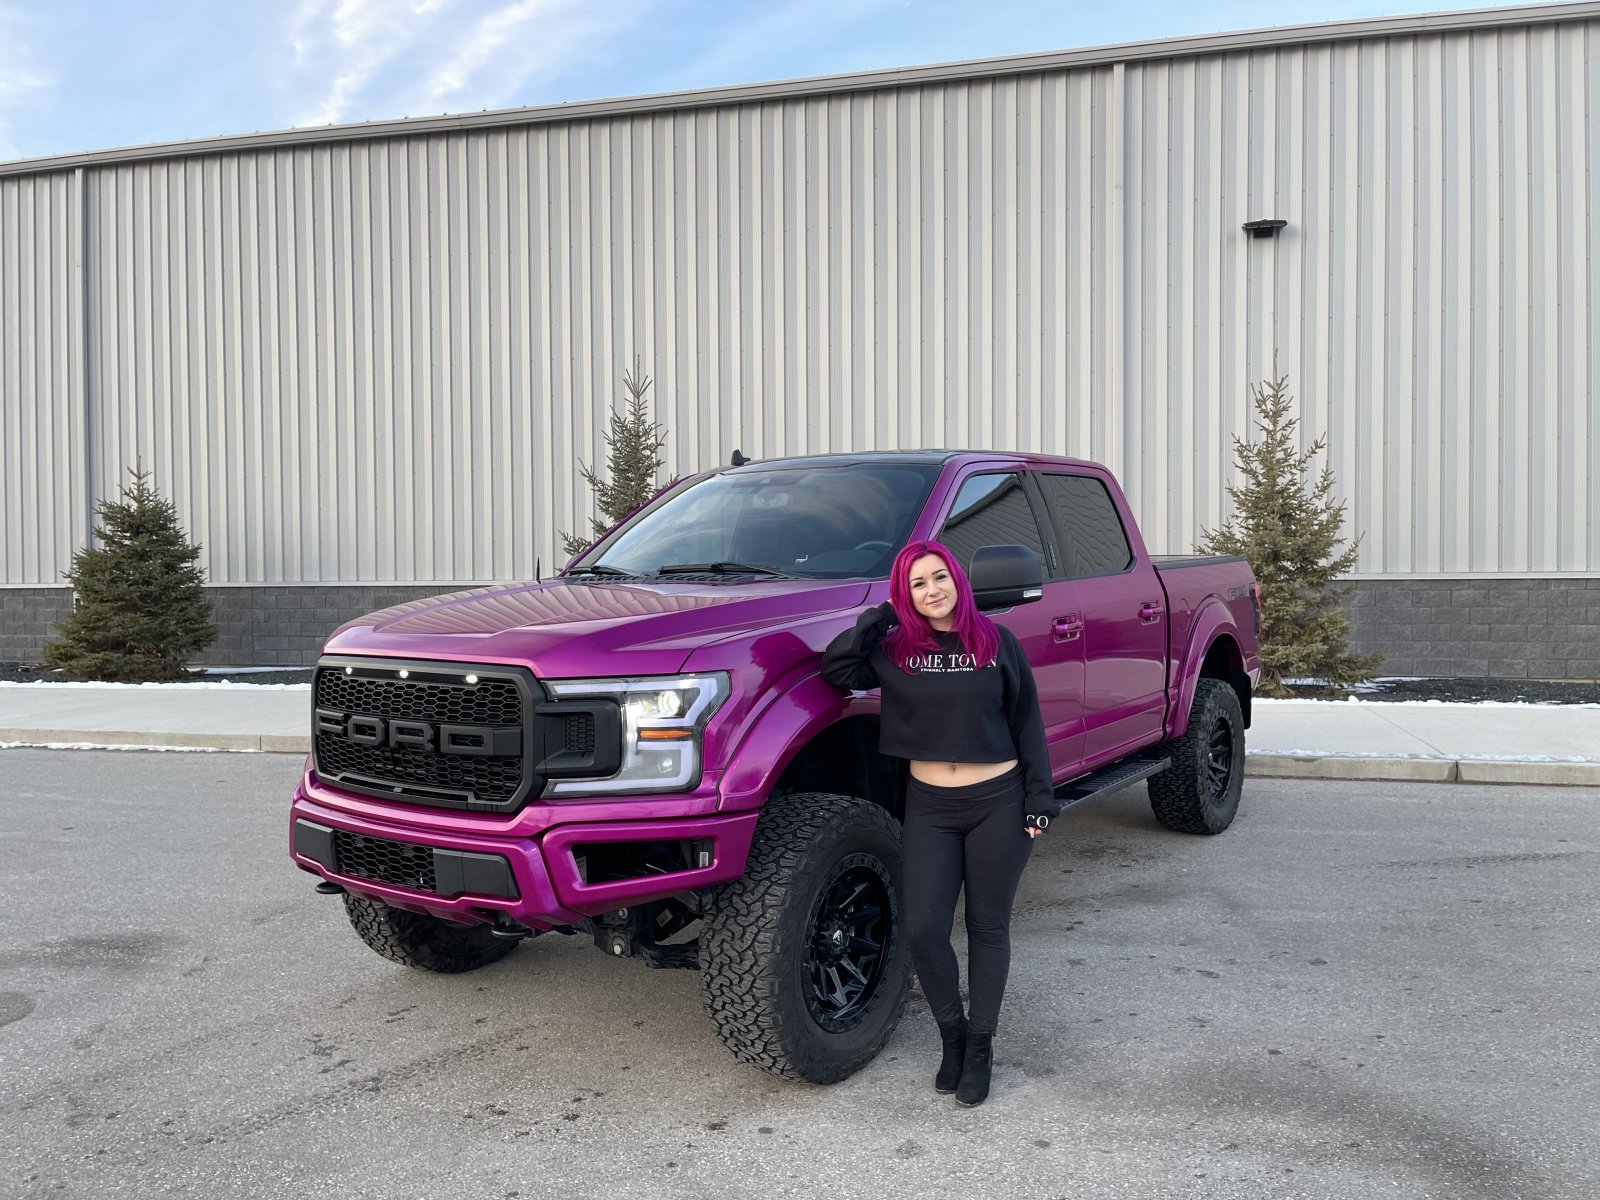 2020 Ford F-150 Lifted FX4 With Unique Color 7.jpeg